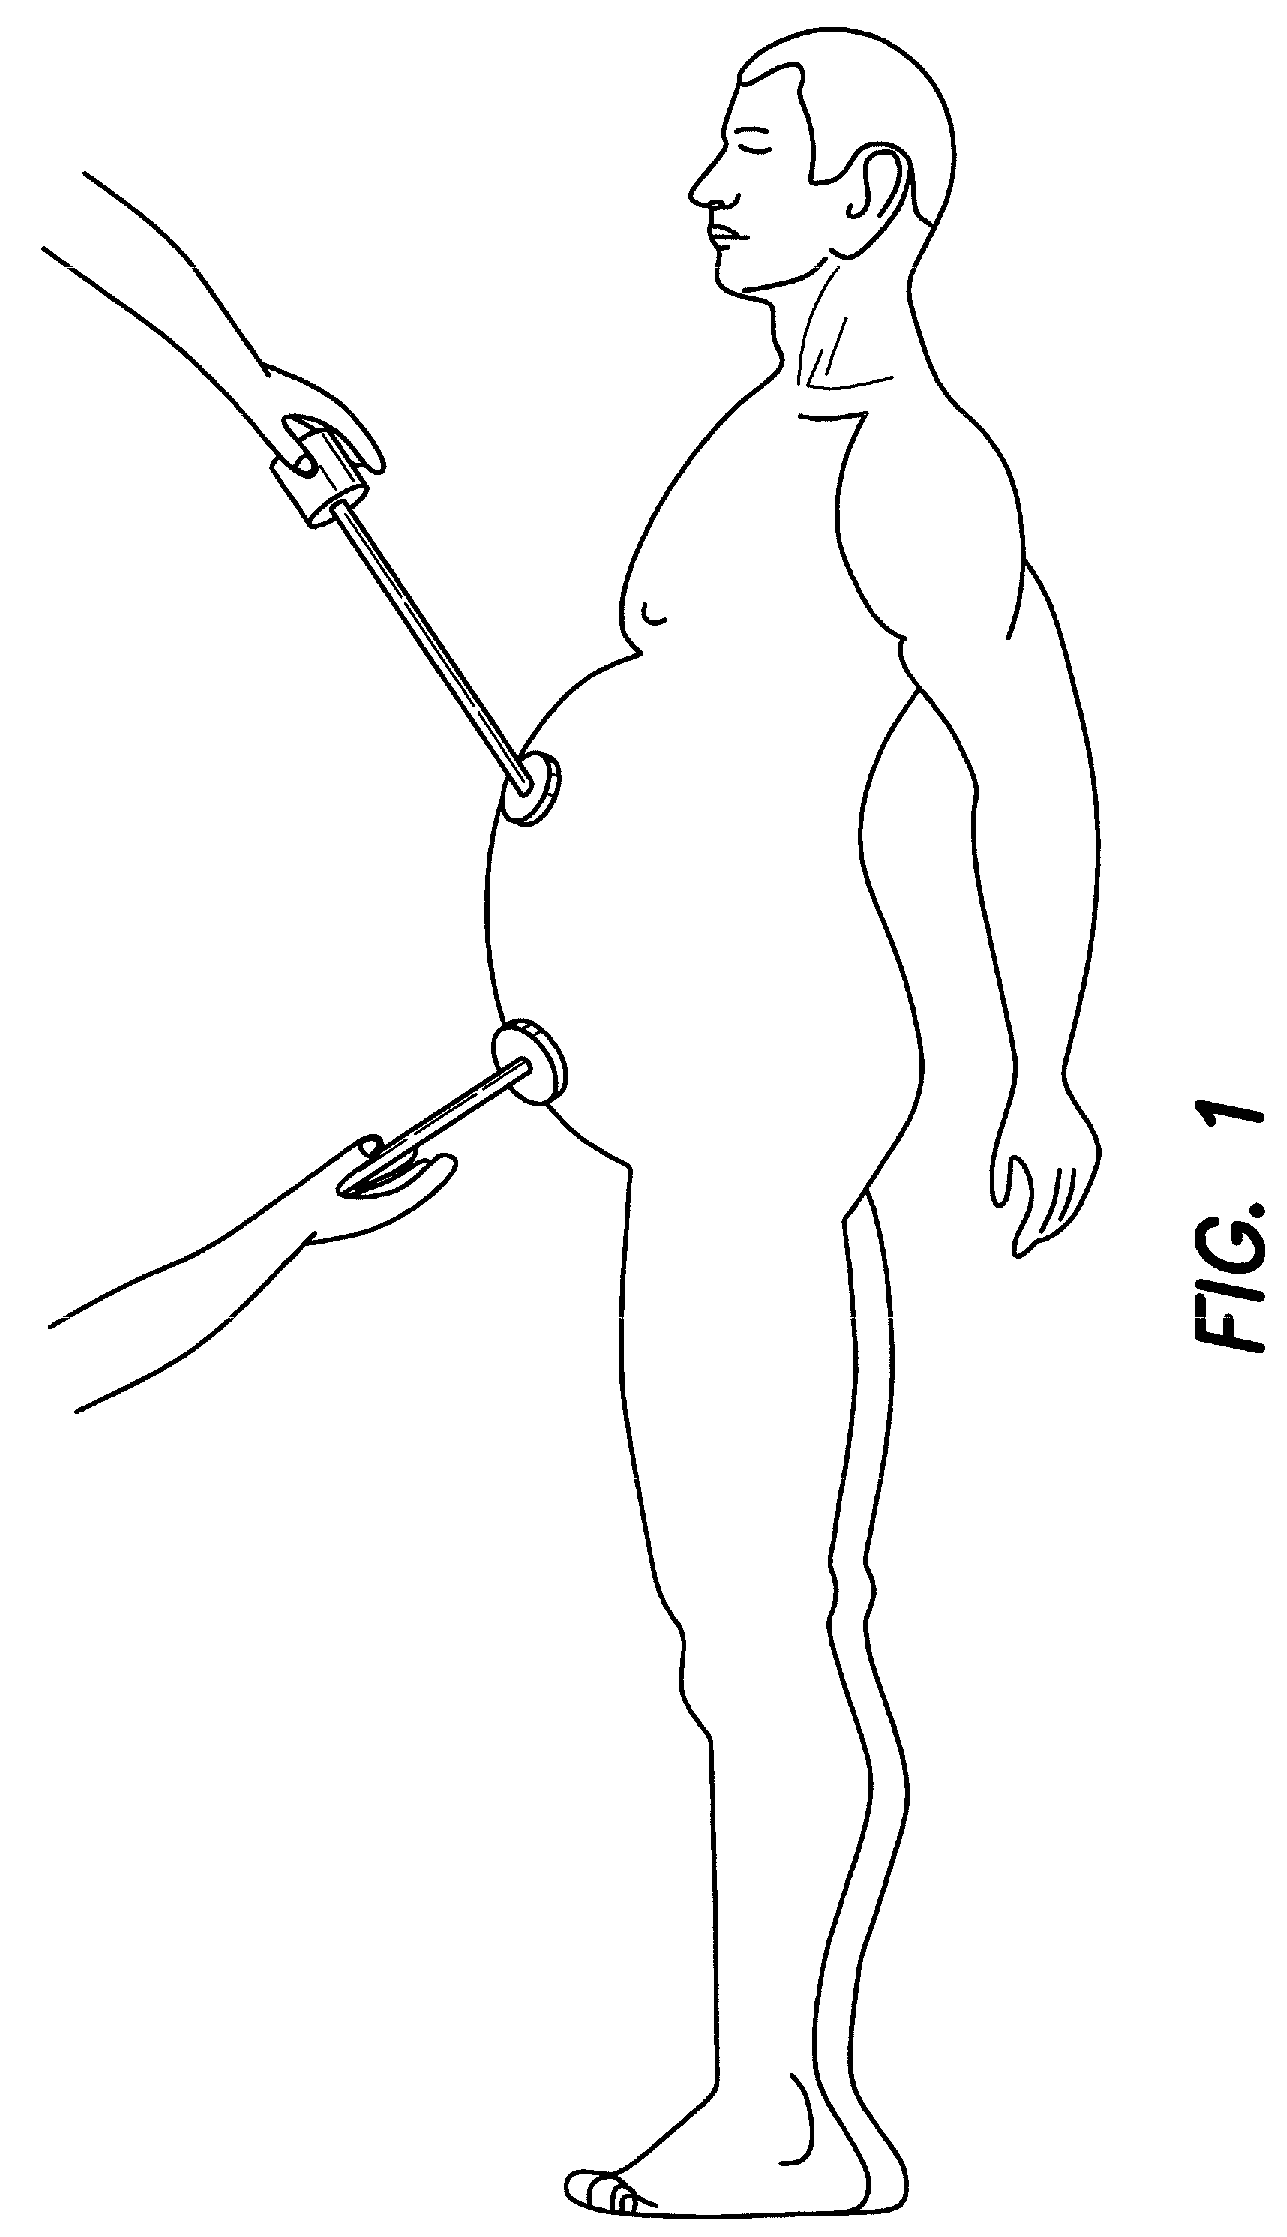 Surgical instrument access device